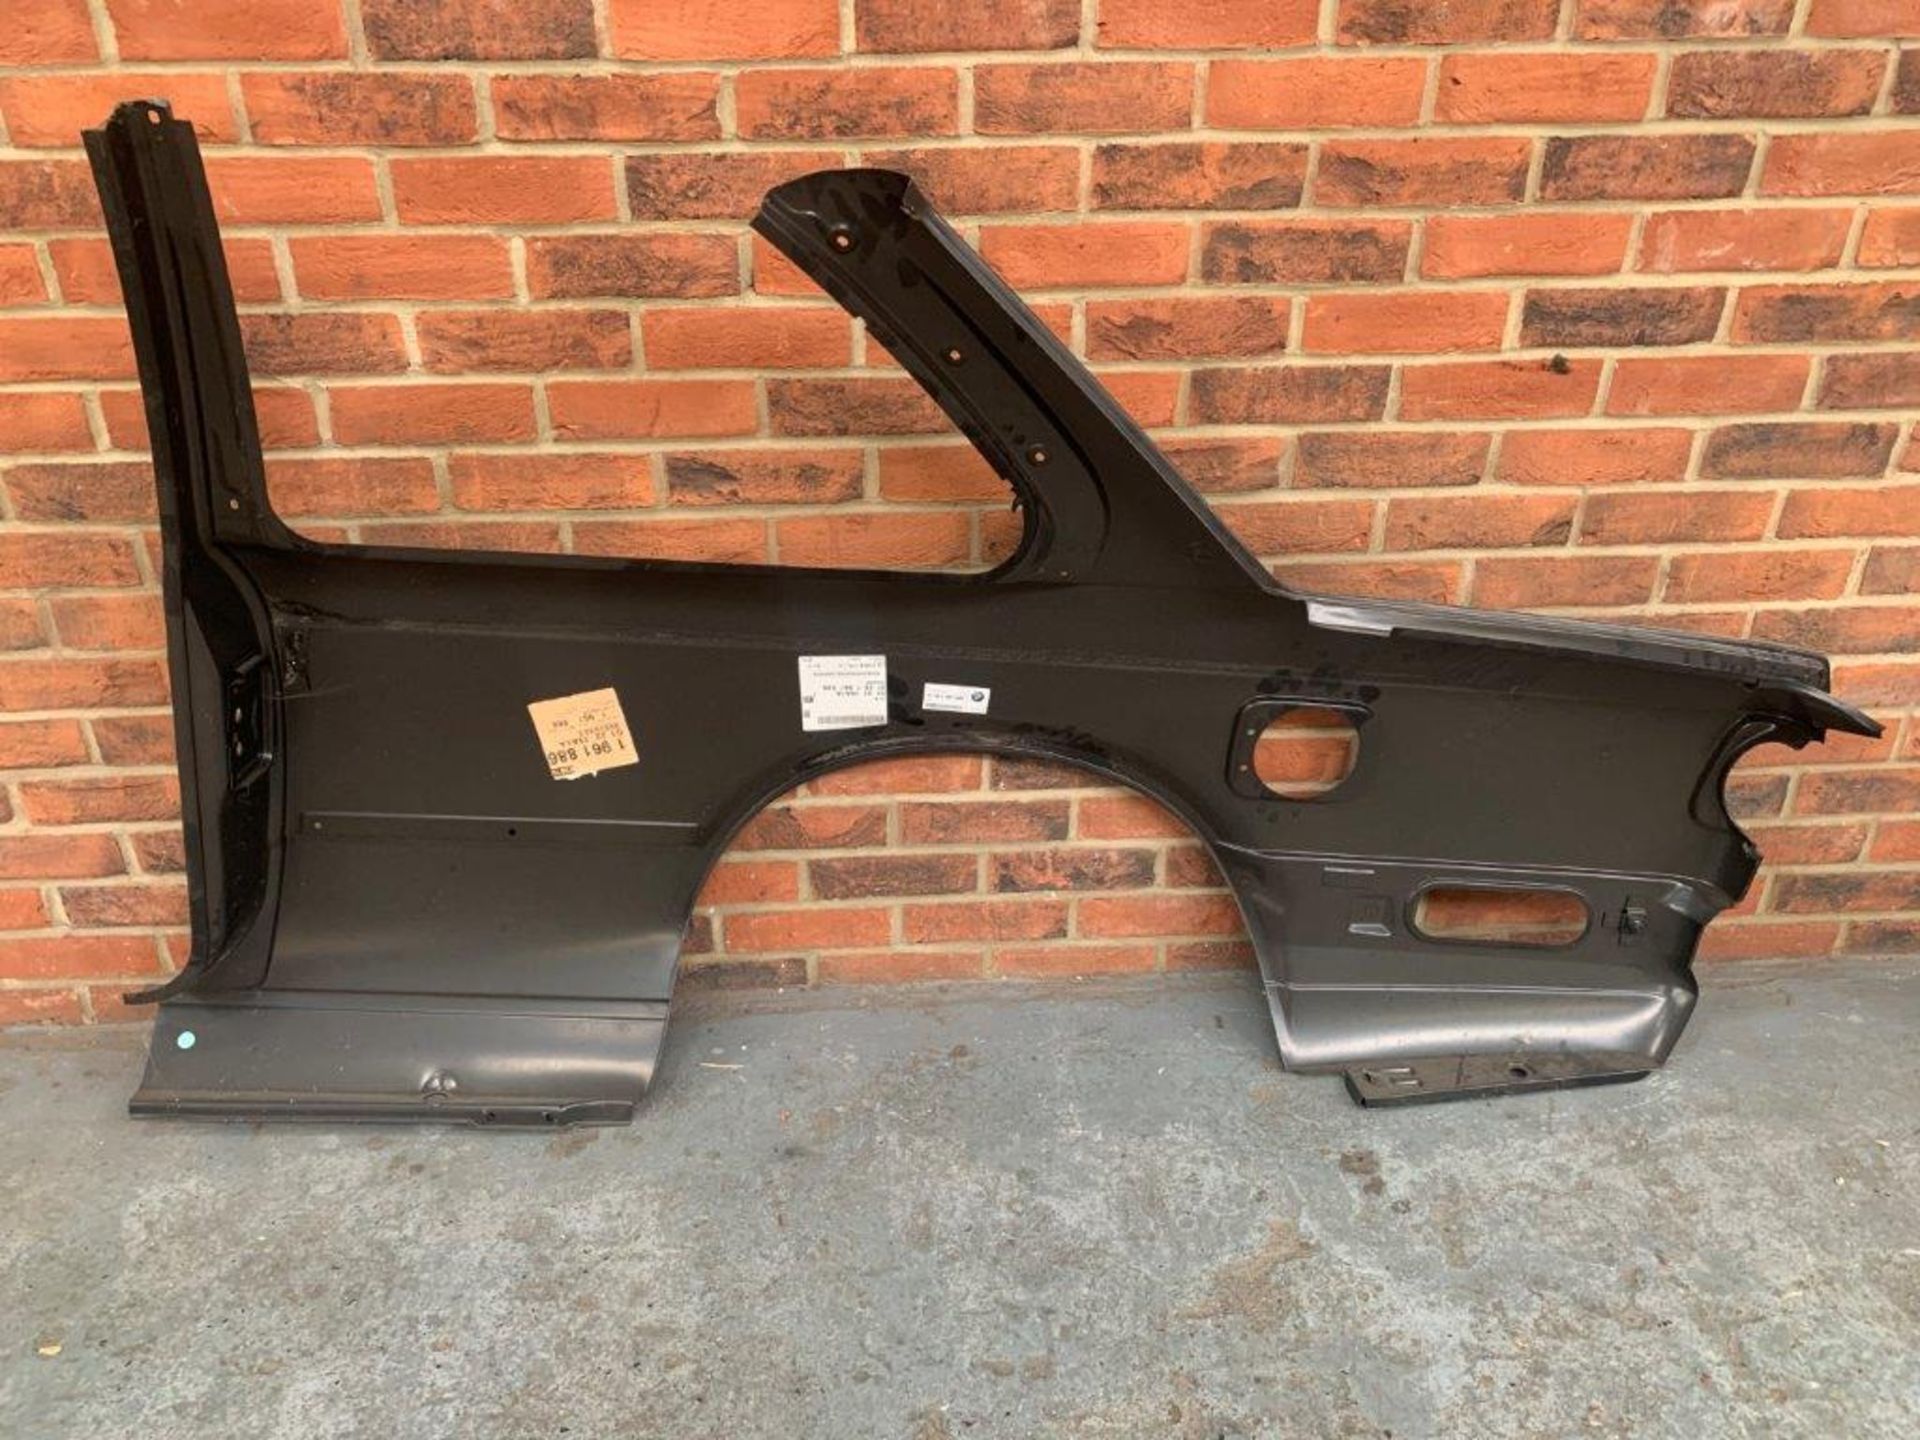 New Old Stock BMW E30 Rear Quarter Panels - Image 3 of 7